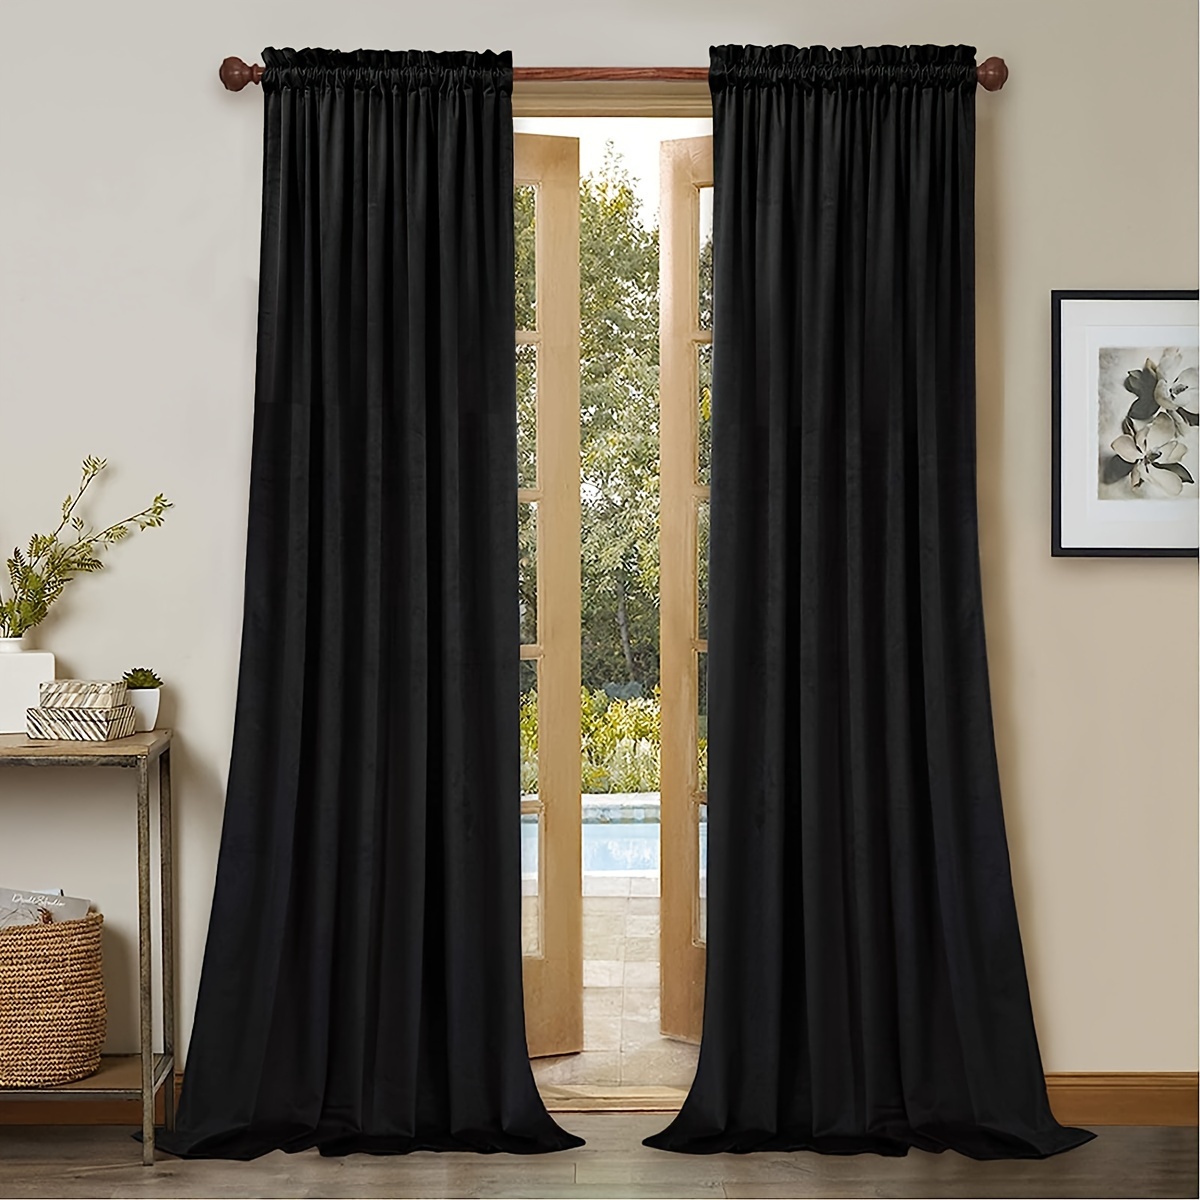 1pc simple solid color thickened warm curtains italian fleece soft material light filter decorative modern festive red curtains long curtain rod pocket door curtains for living room bedroom home decoration